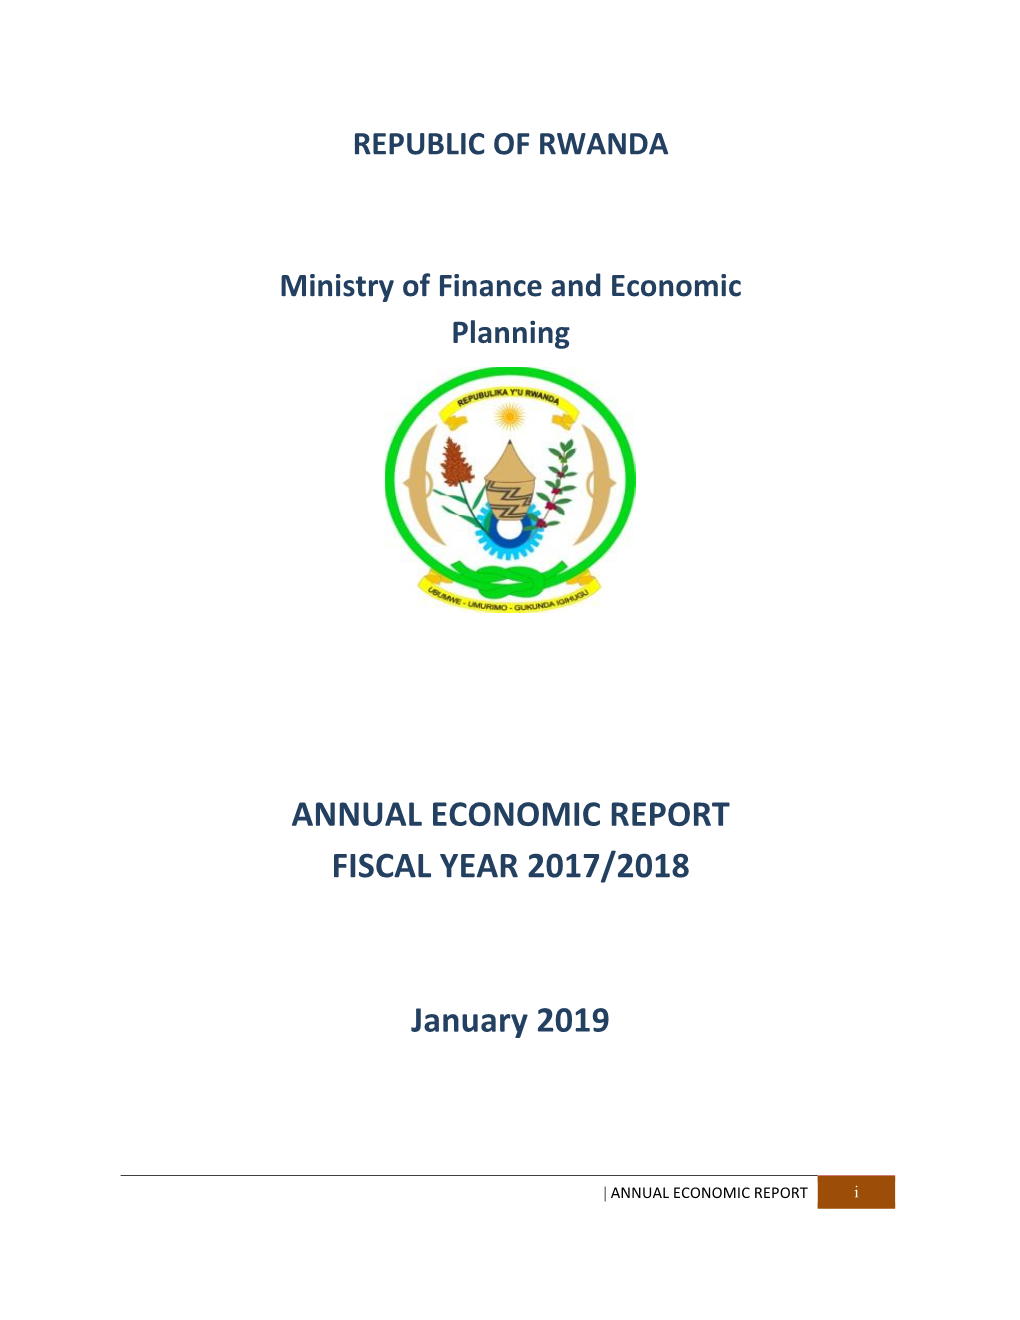 ANNUAL ECONOMIC REPORT FISCAL YEAR 2017/2018 January 2019